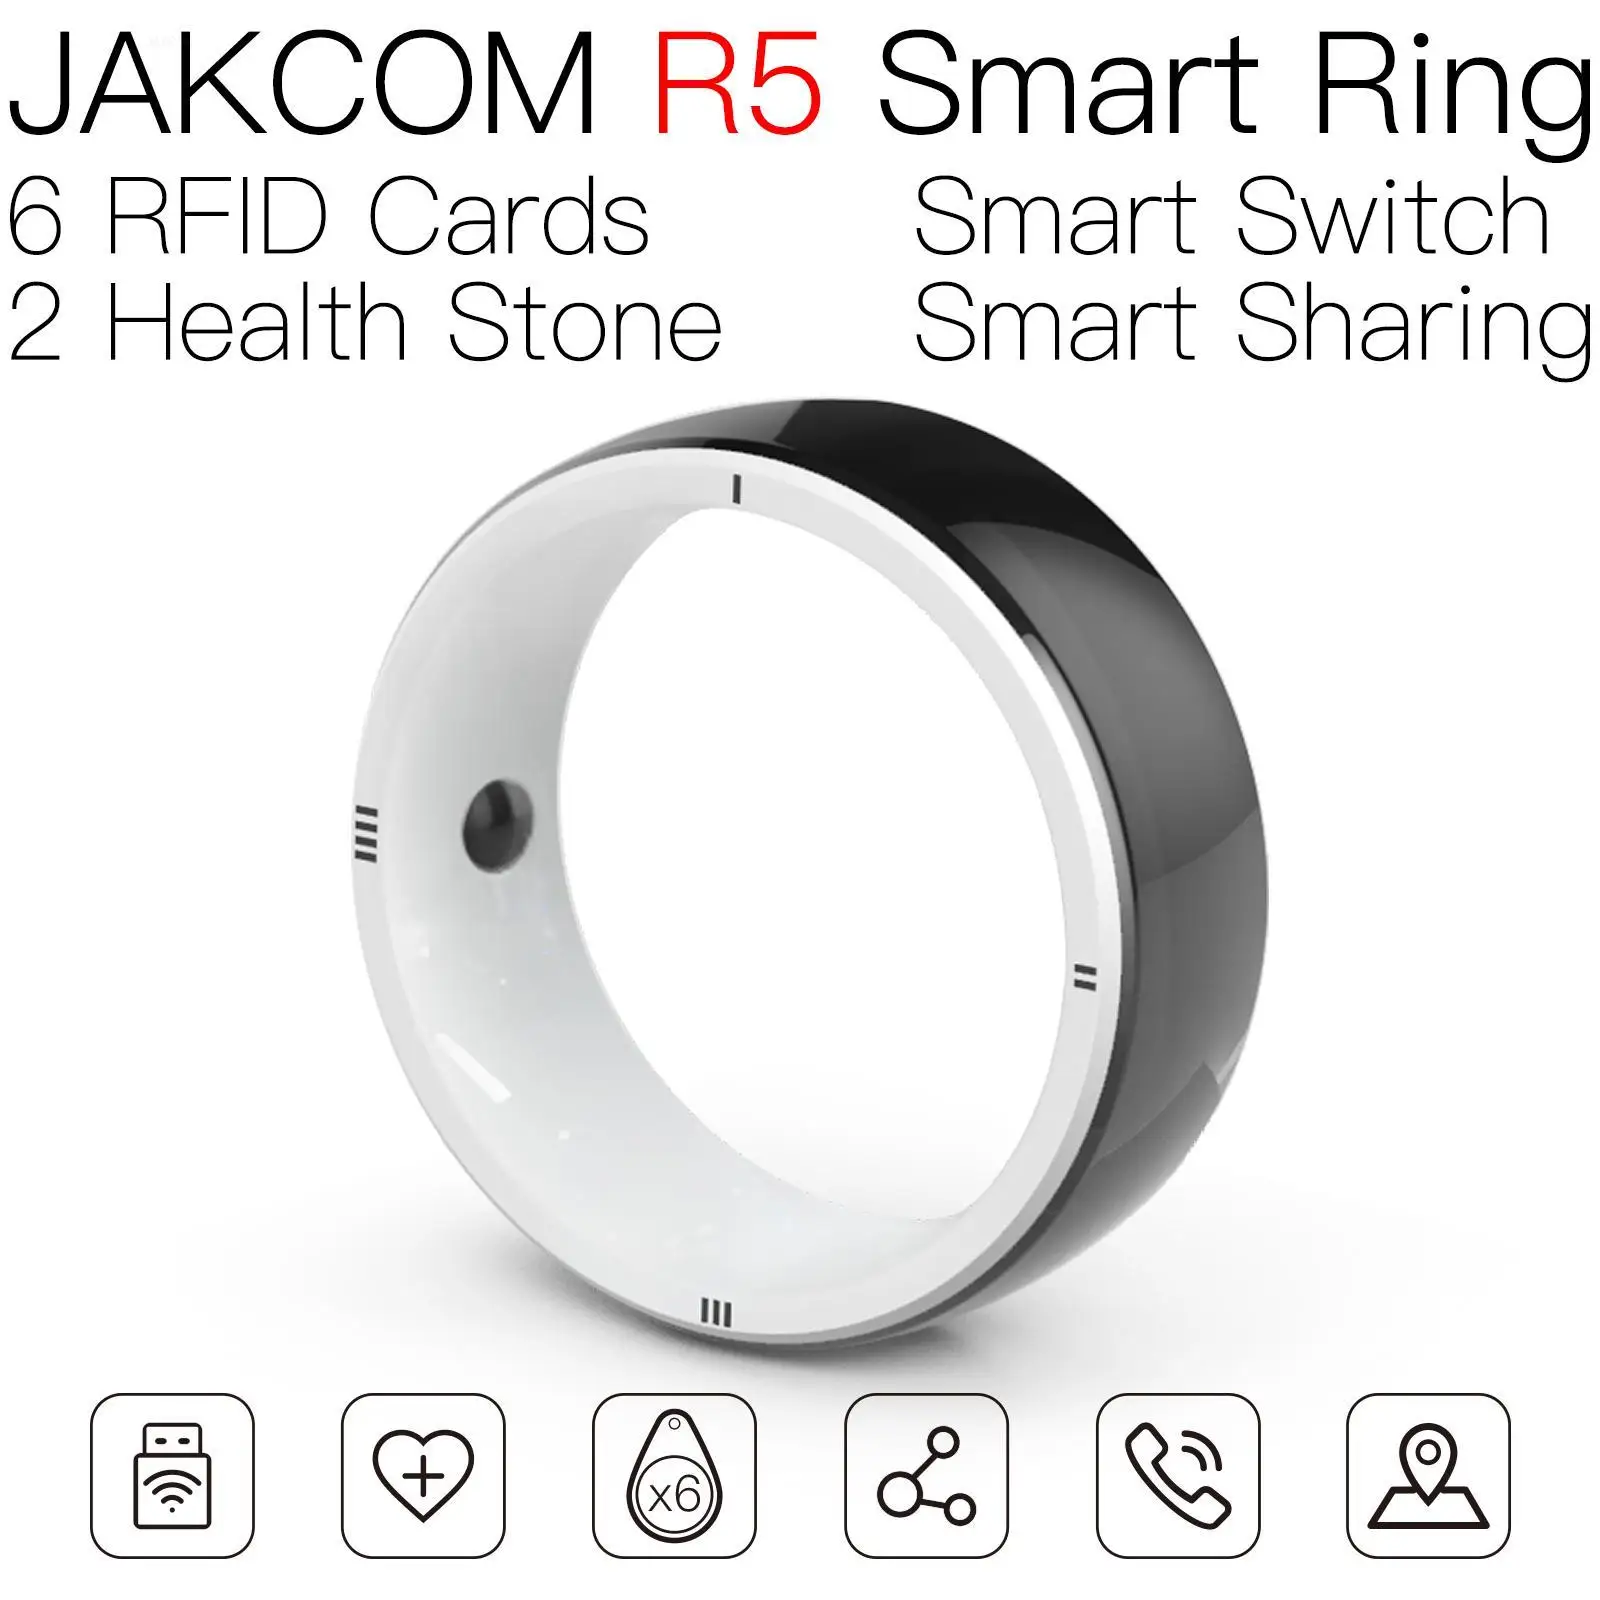 

JAKCOM R5 Smart Ring Match to bracelet rfid nail chip nfc tag 1k bit for library uid changeable card 7 byte 1 125khz